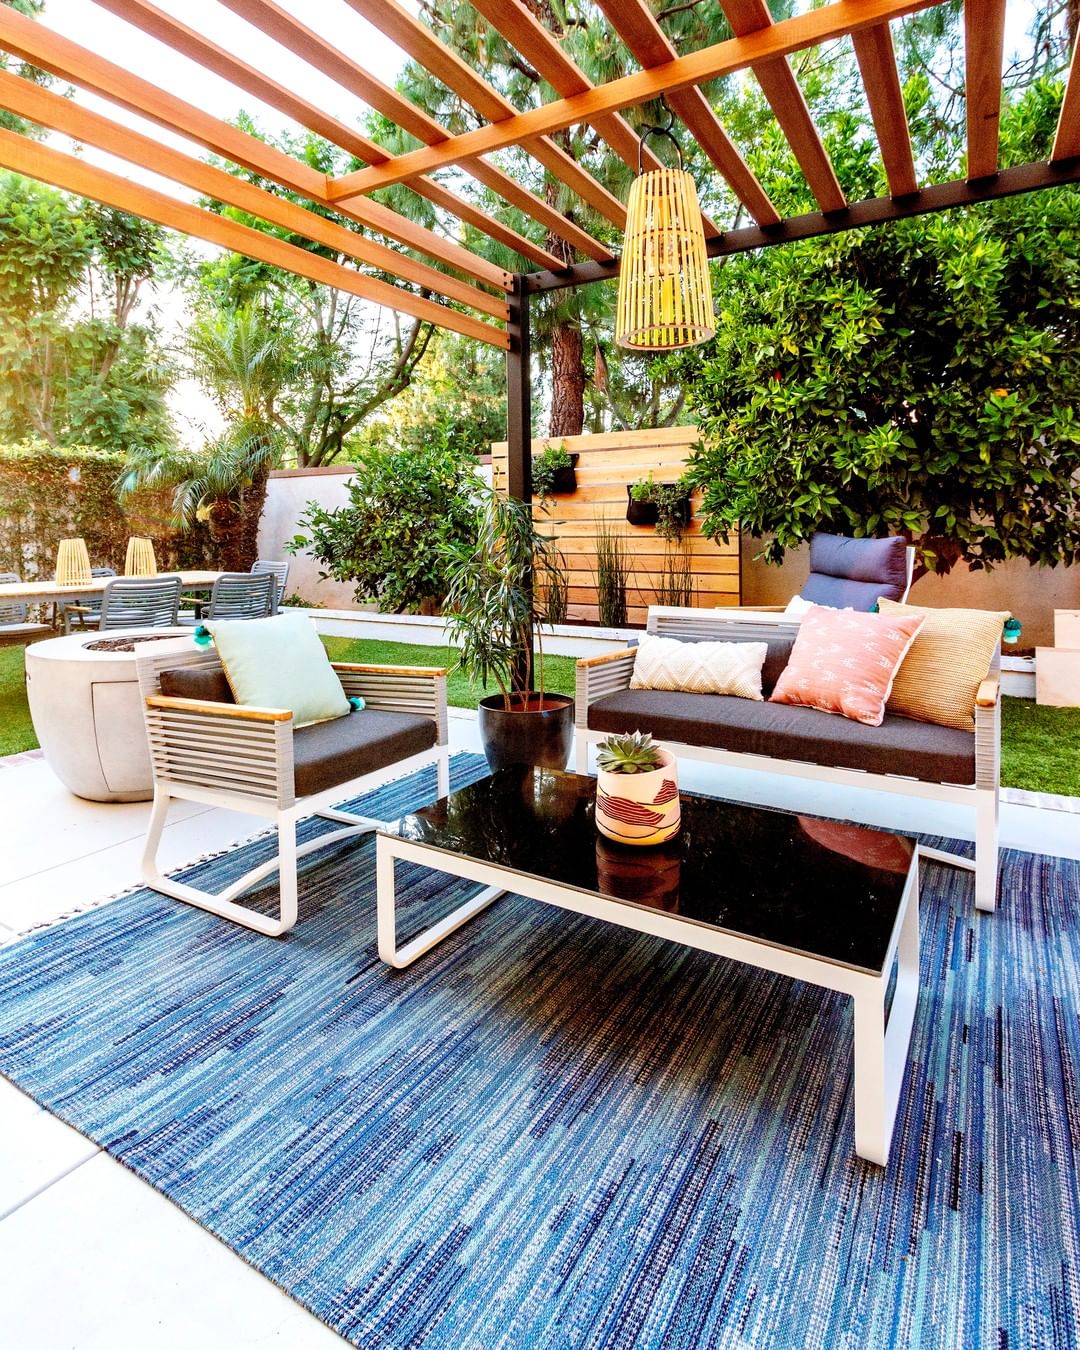 outdoor living space with pergola and outdoor rug photo by Instagram user @anitayokota